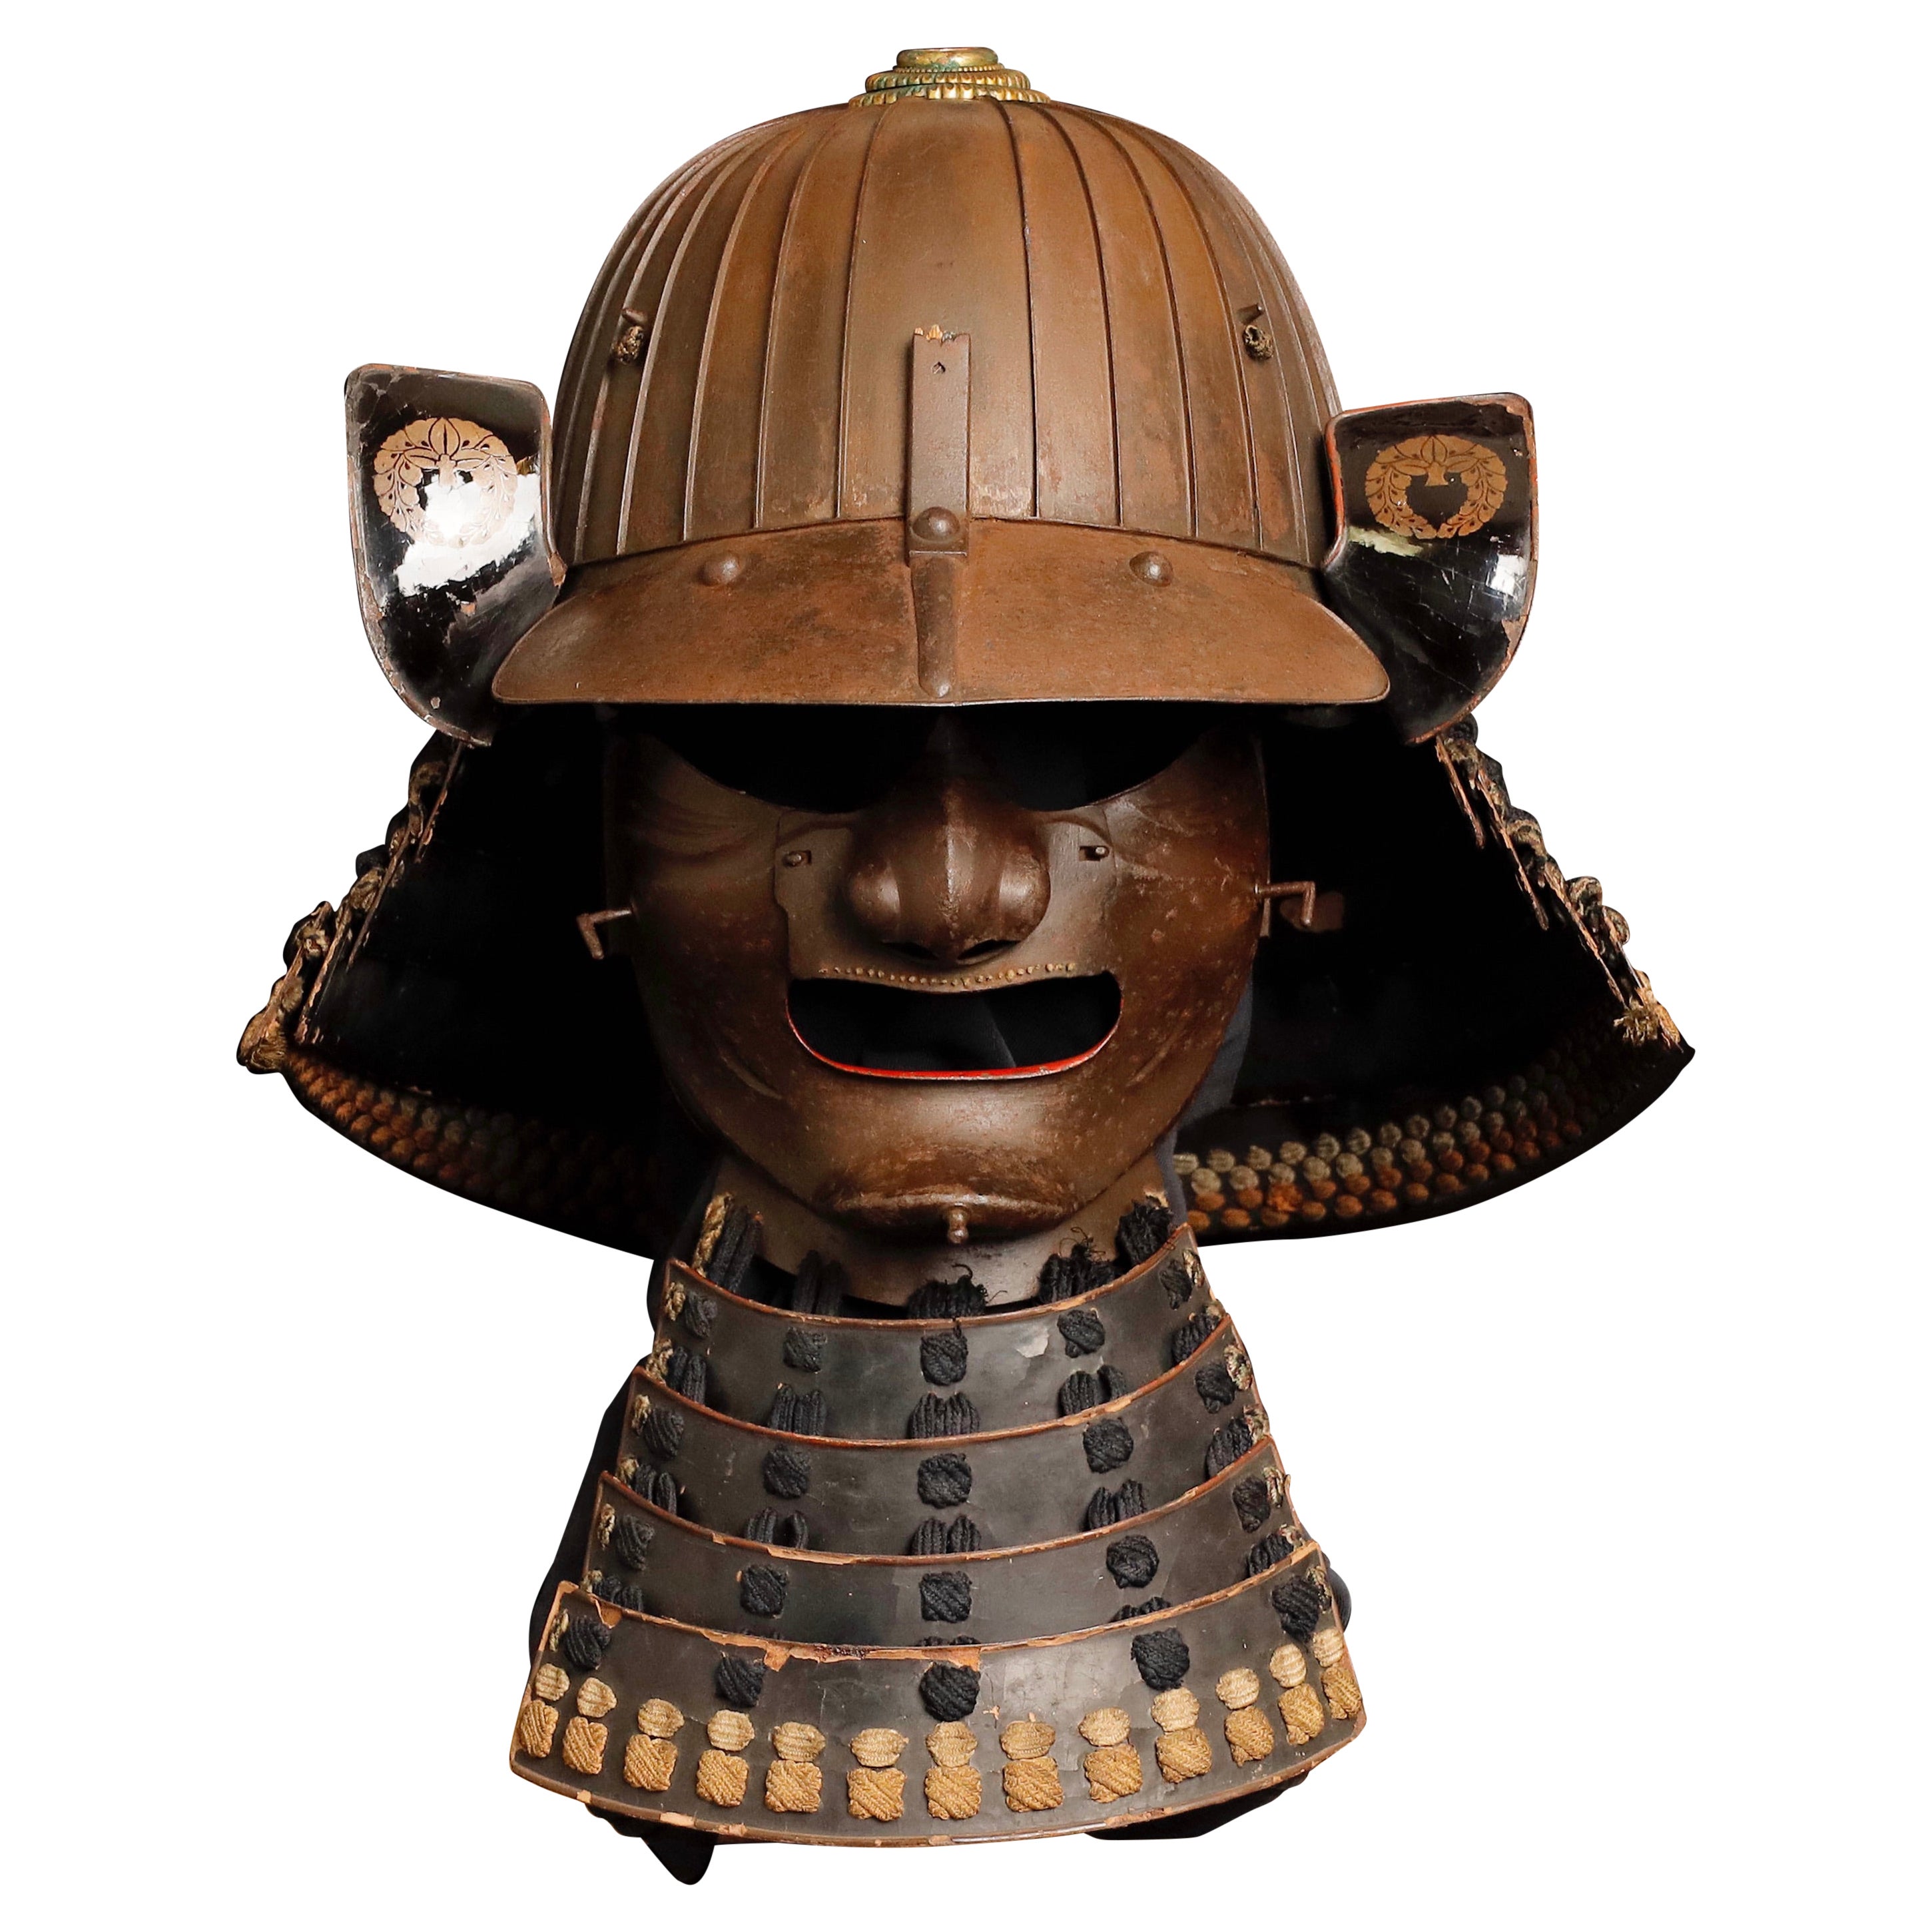 Edo-Era Samurai Helmet and Mask Set, an Authentic Piece of History from the 17th